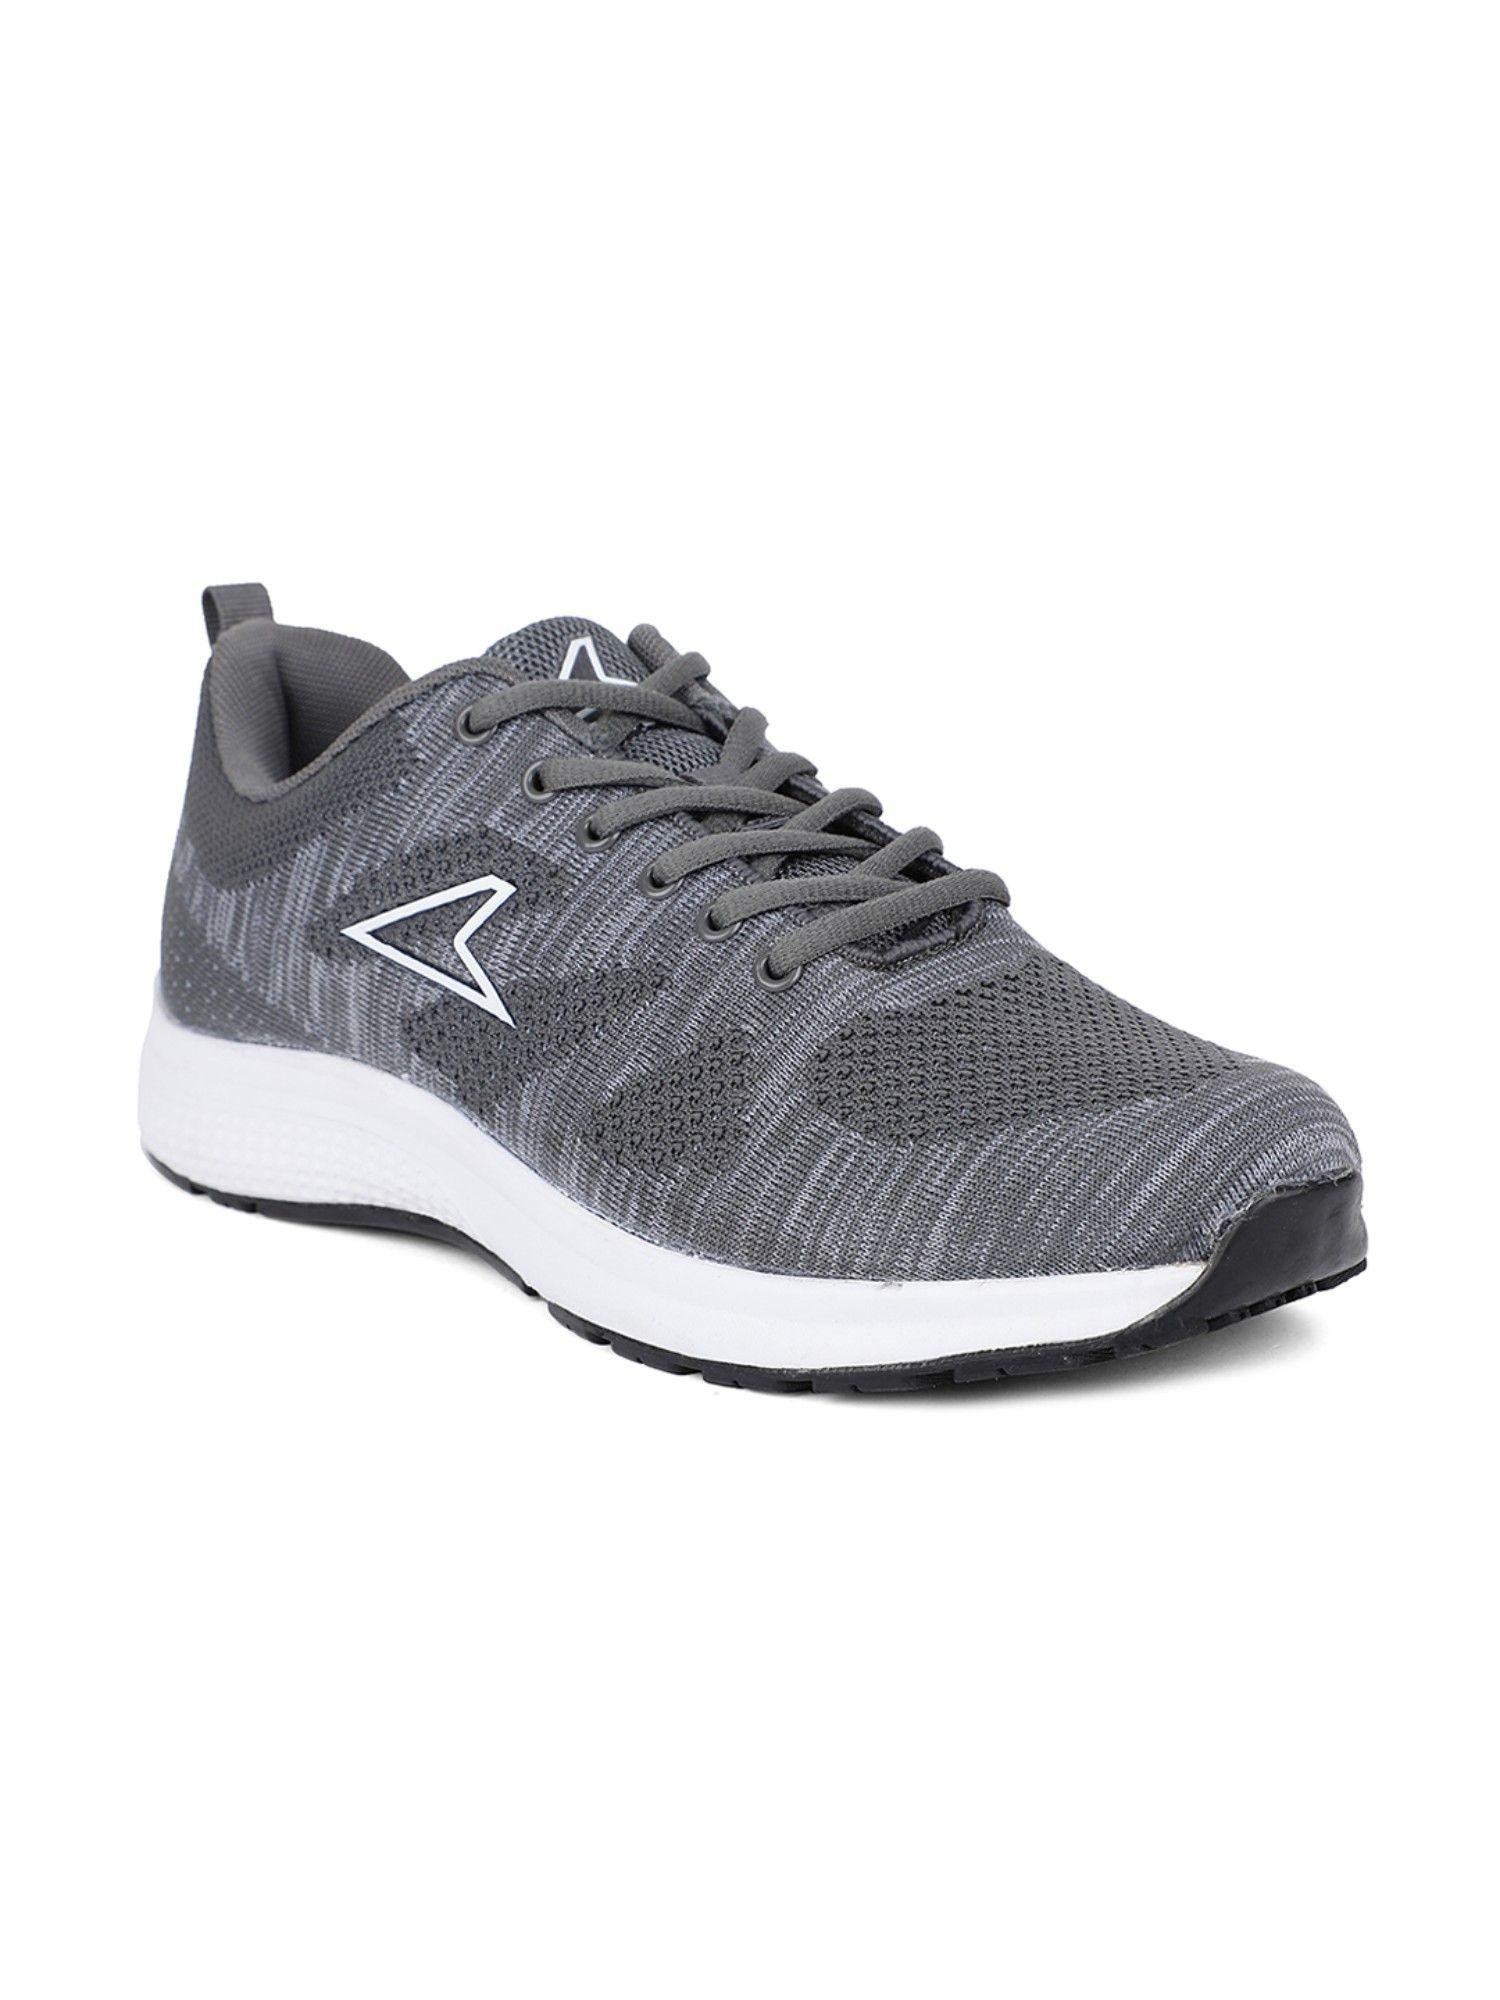 woven-grey-running-shoes